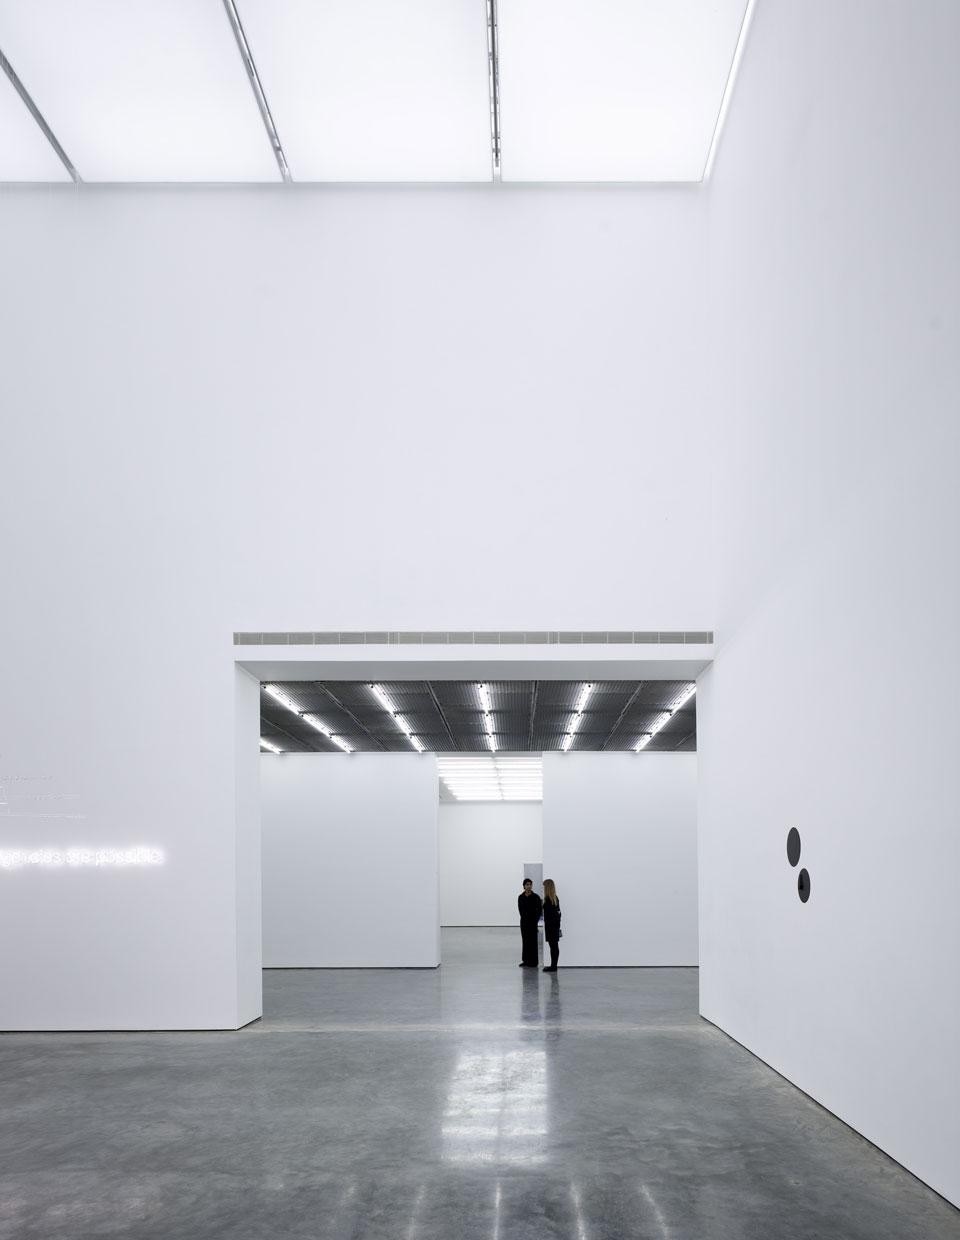 Skylights allow for natural light to bathe the space. Photo courtesy White Cube Bermondsey